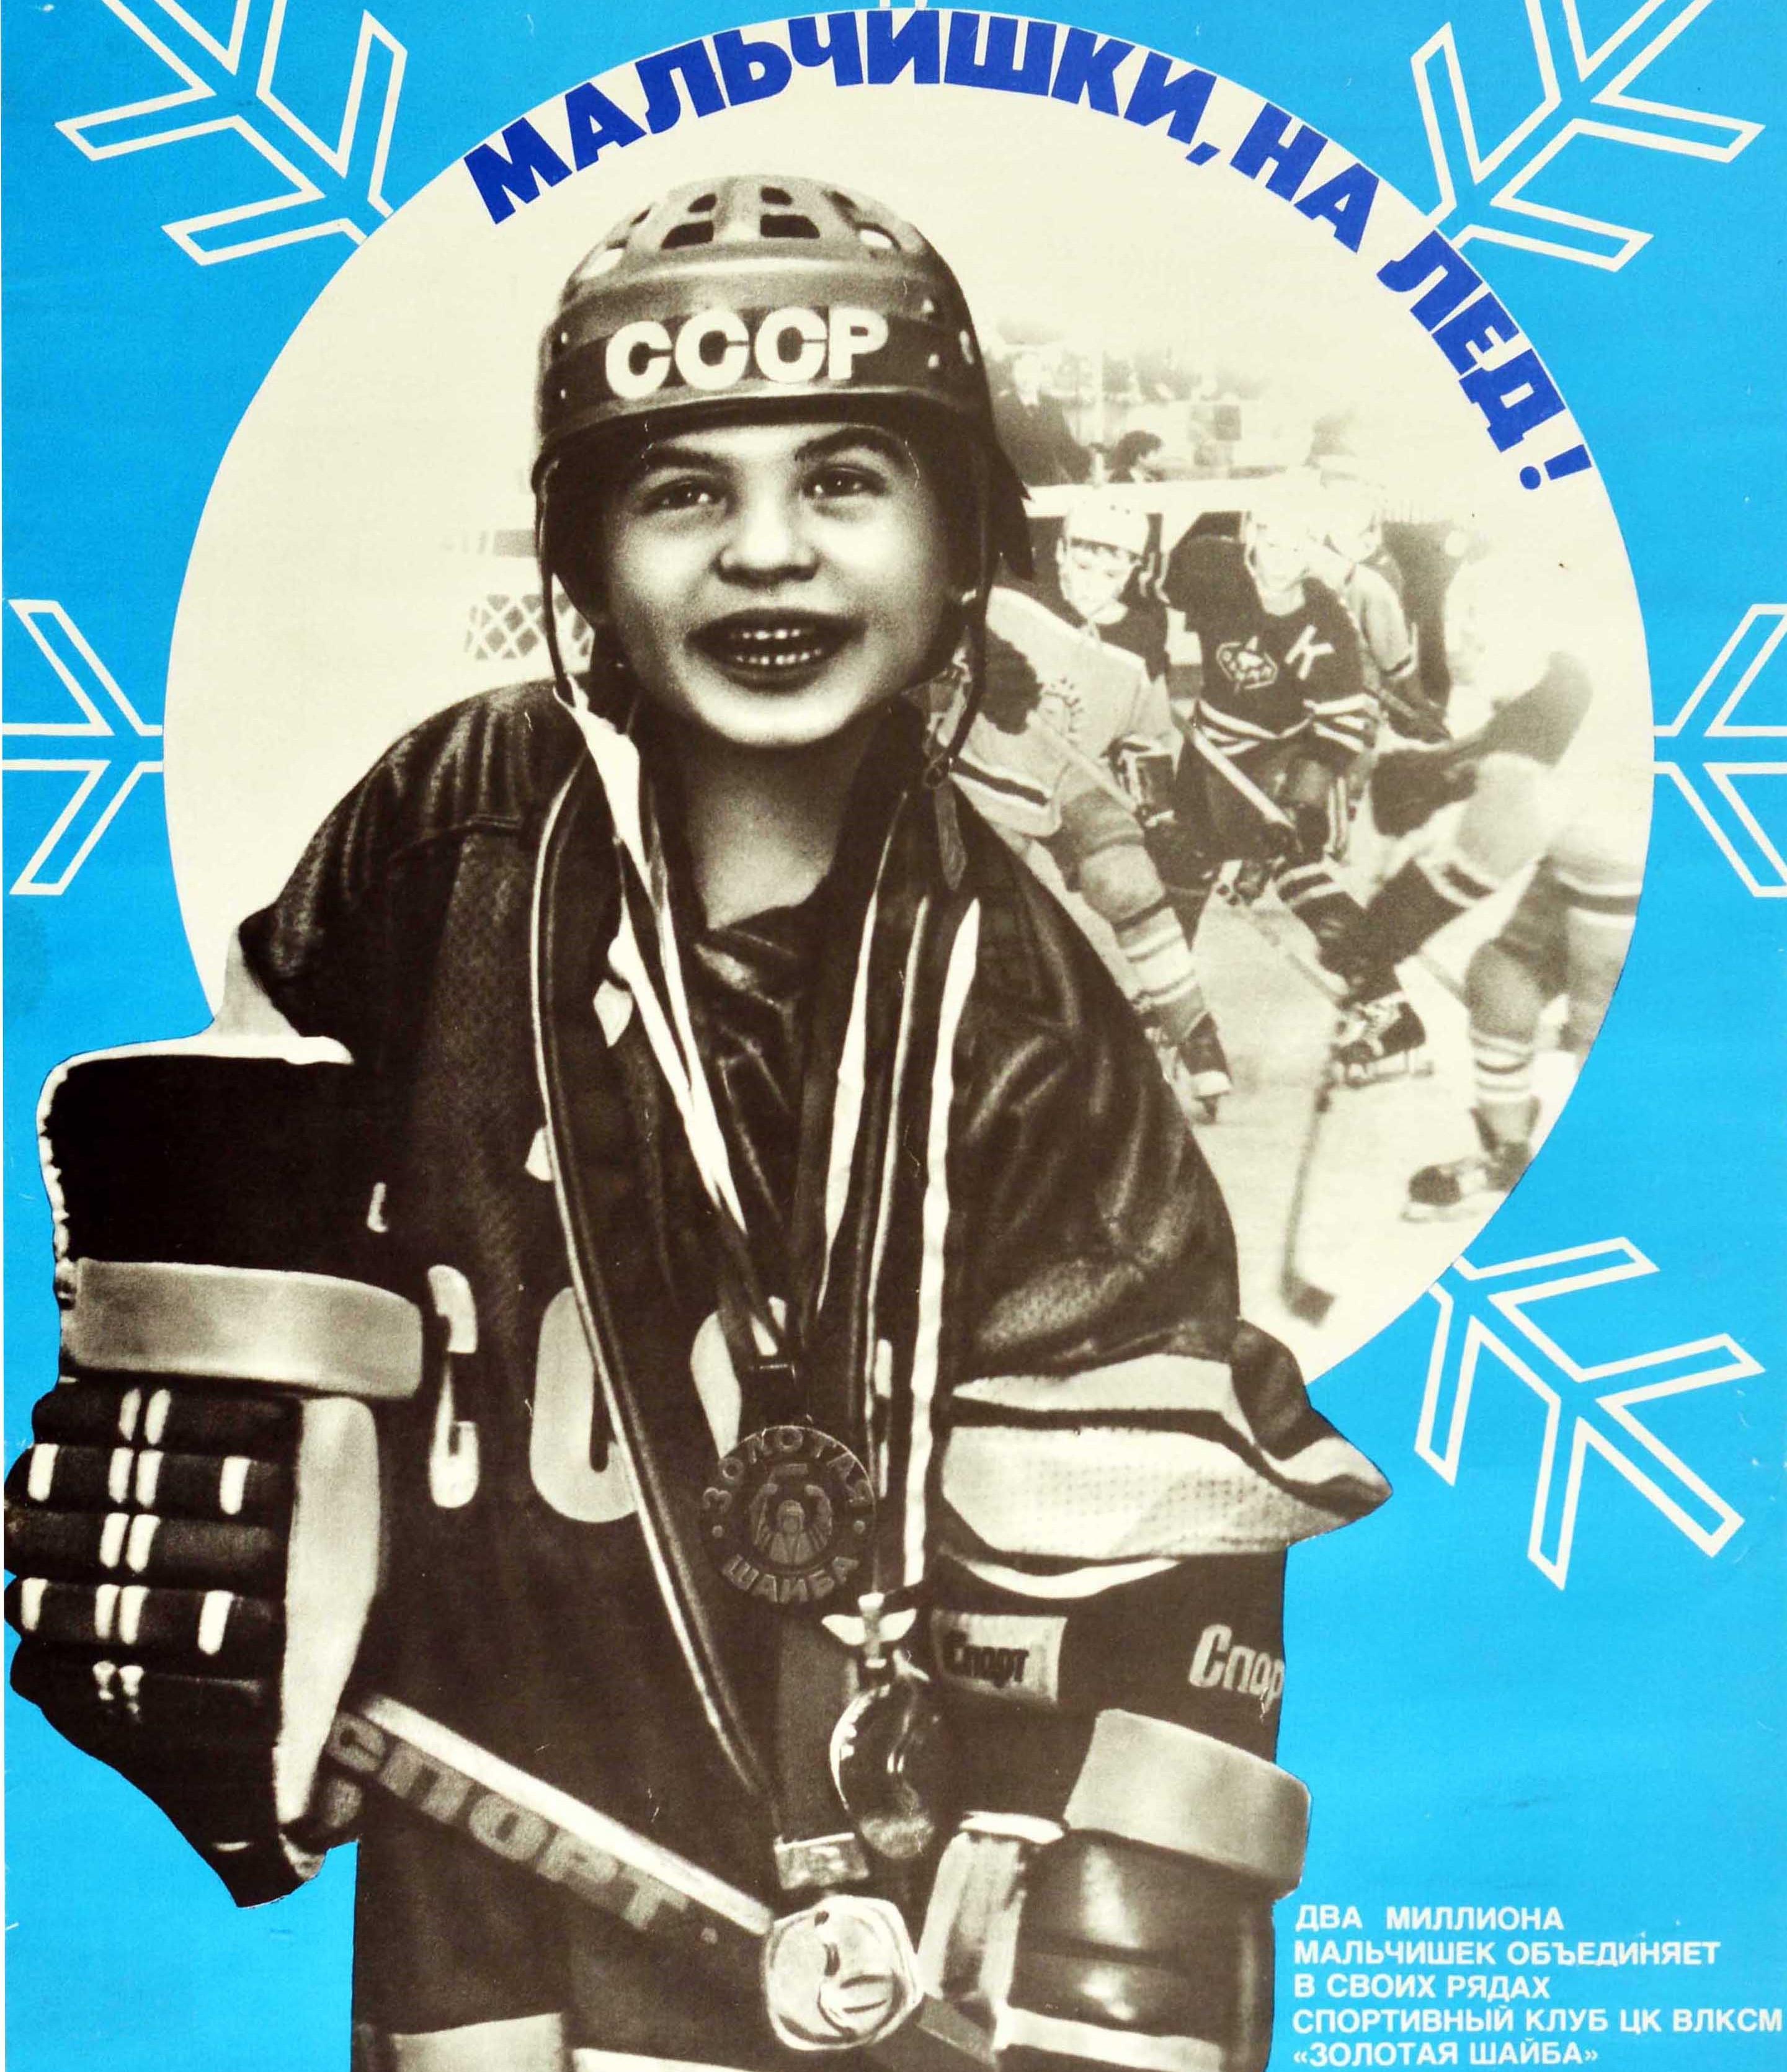 Original Vintage Poster Get On The Ice! USSR Ice Hockey Soviet Sport Propaganda In Good Condition For Sale In London, GB